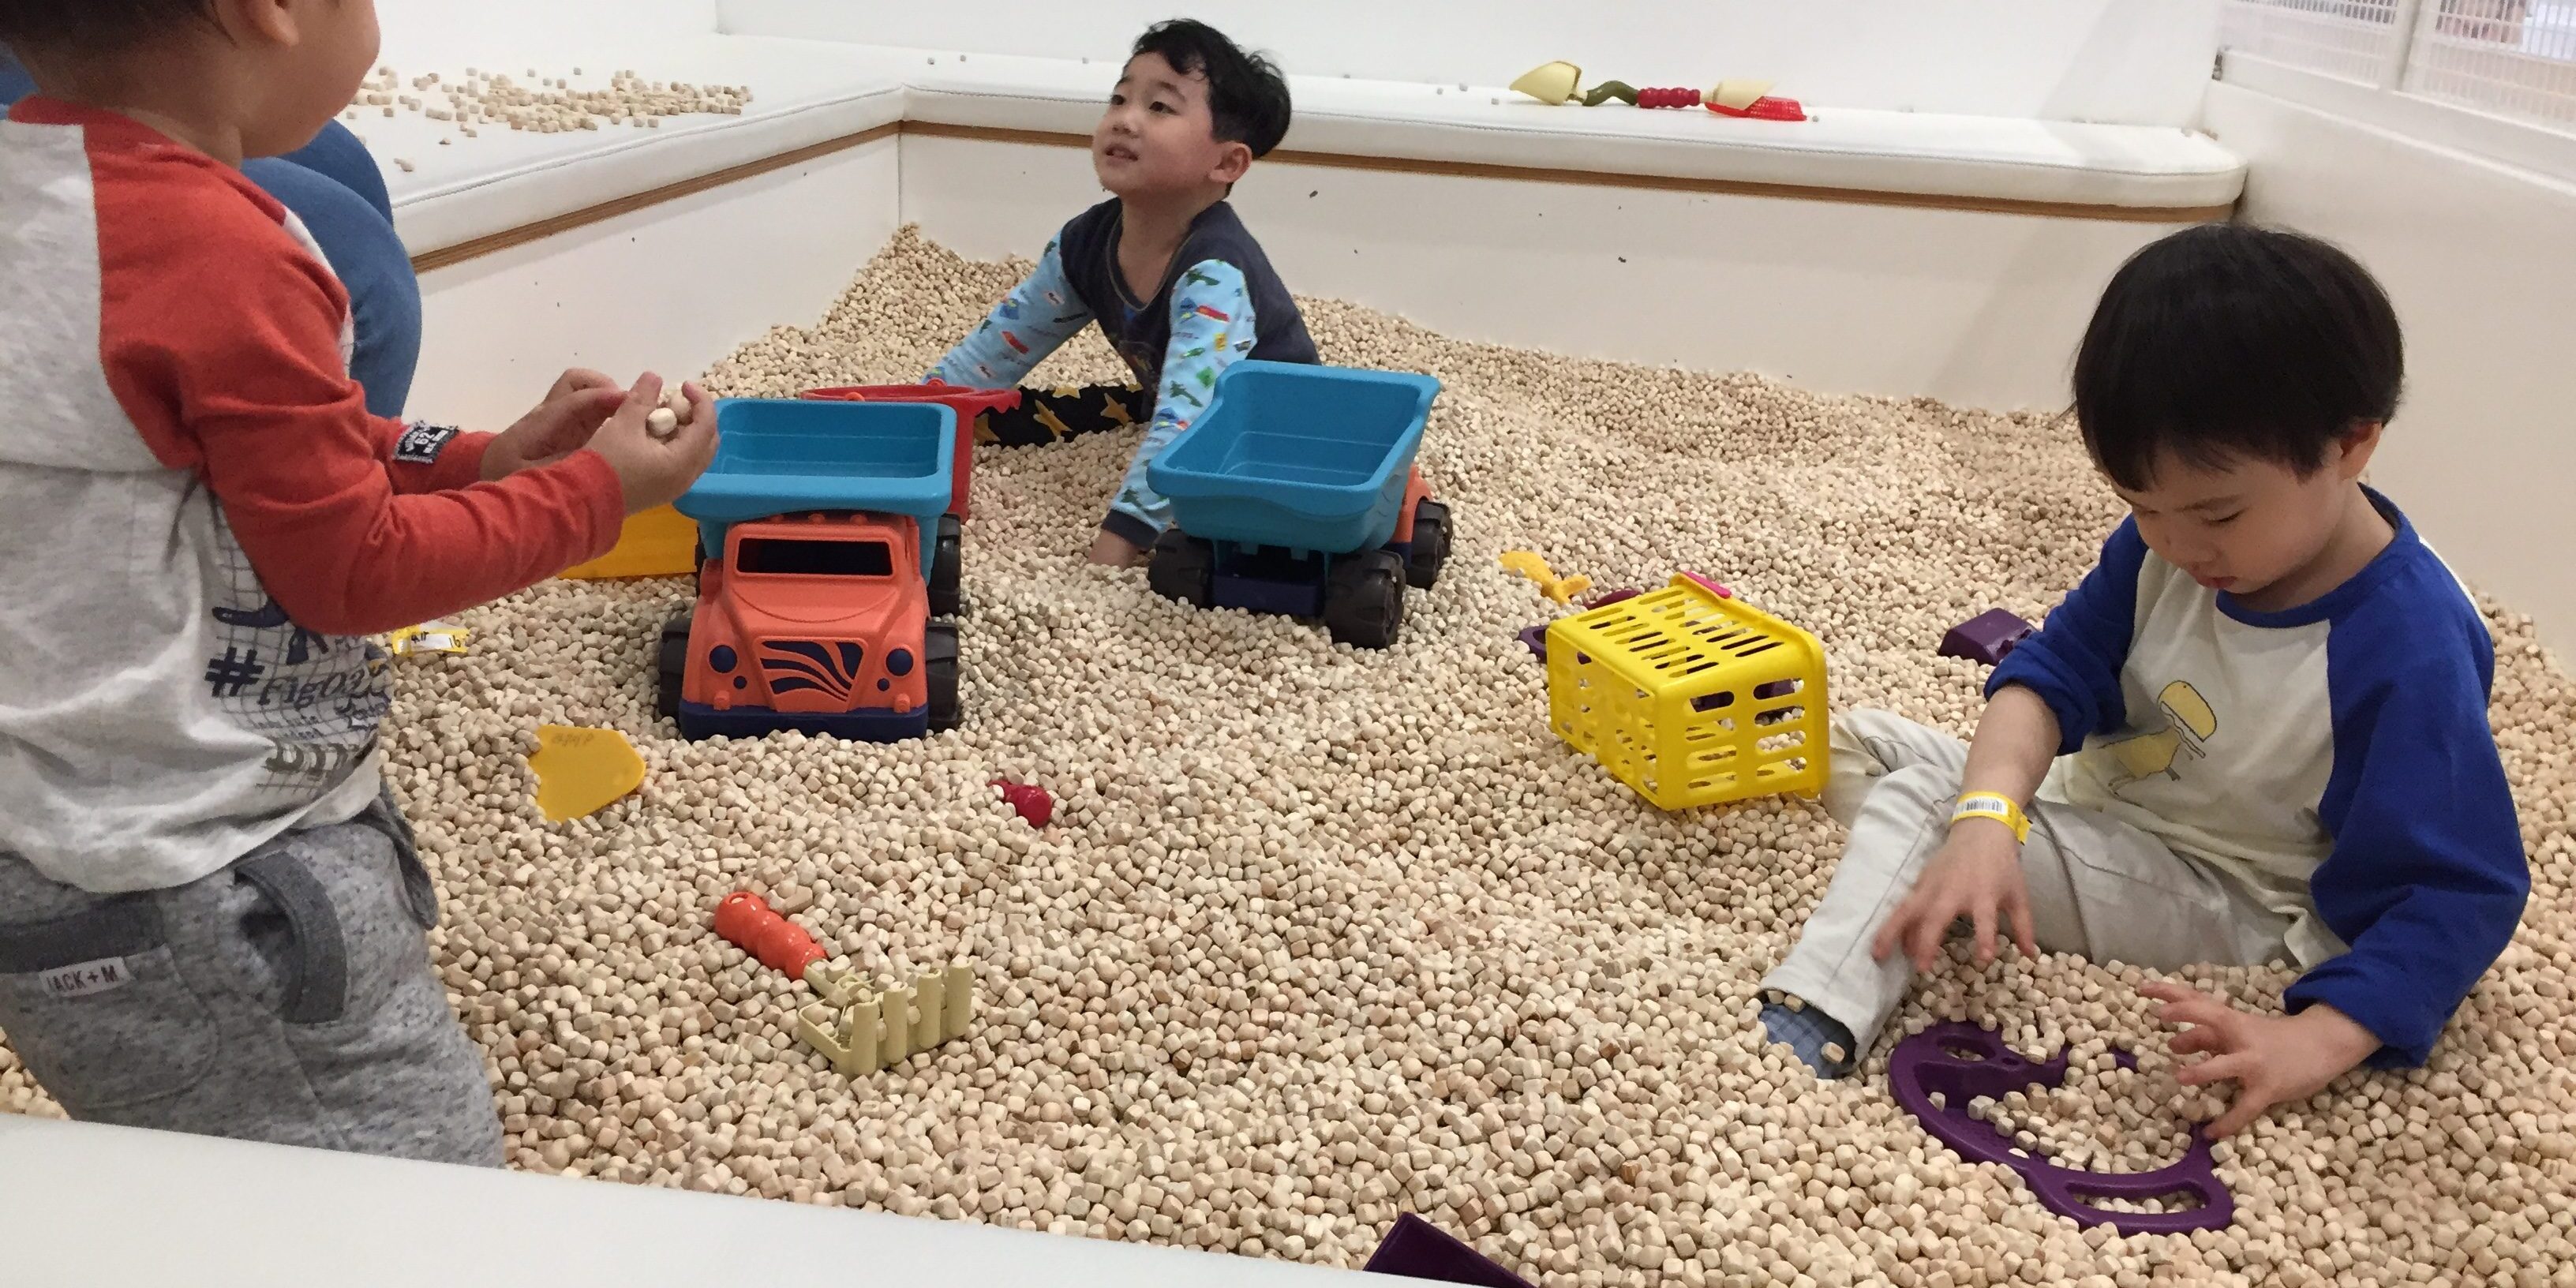 The "sand-pit" made with small wooden pebbles. A much cleaner version of actual sand. Mommy loves! Pororo Lounge, Coex, Seoul